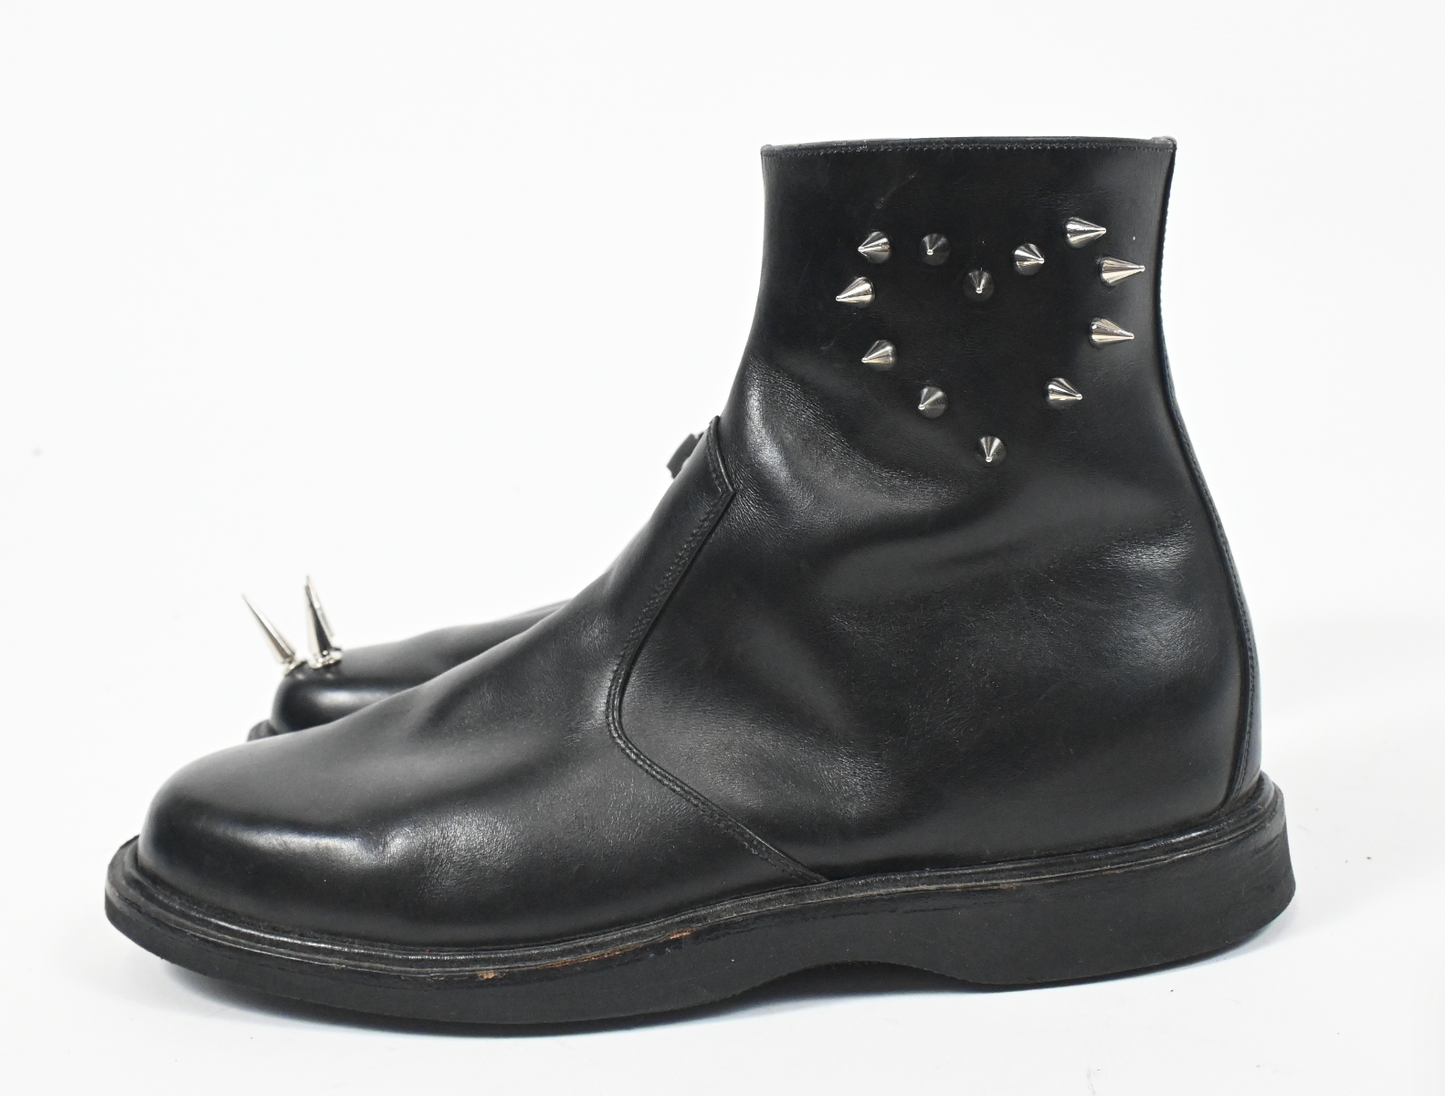 Spike boots (9W)